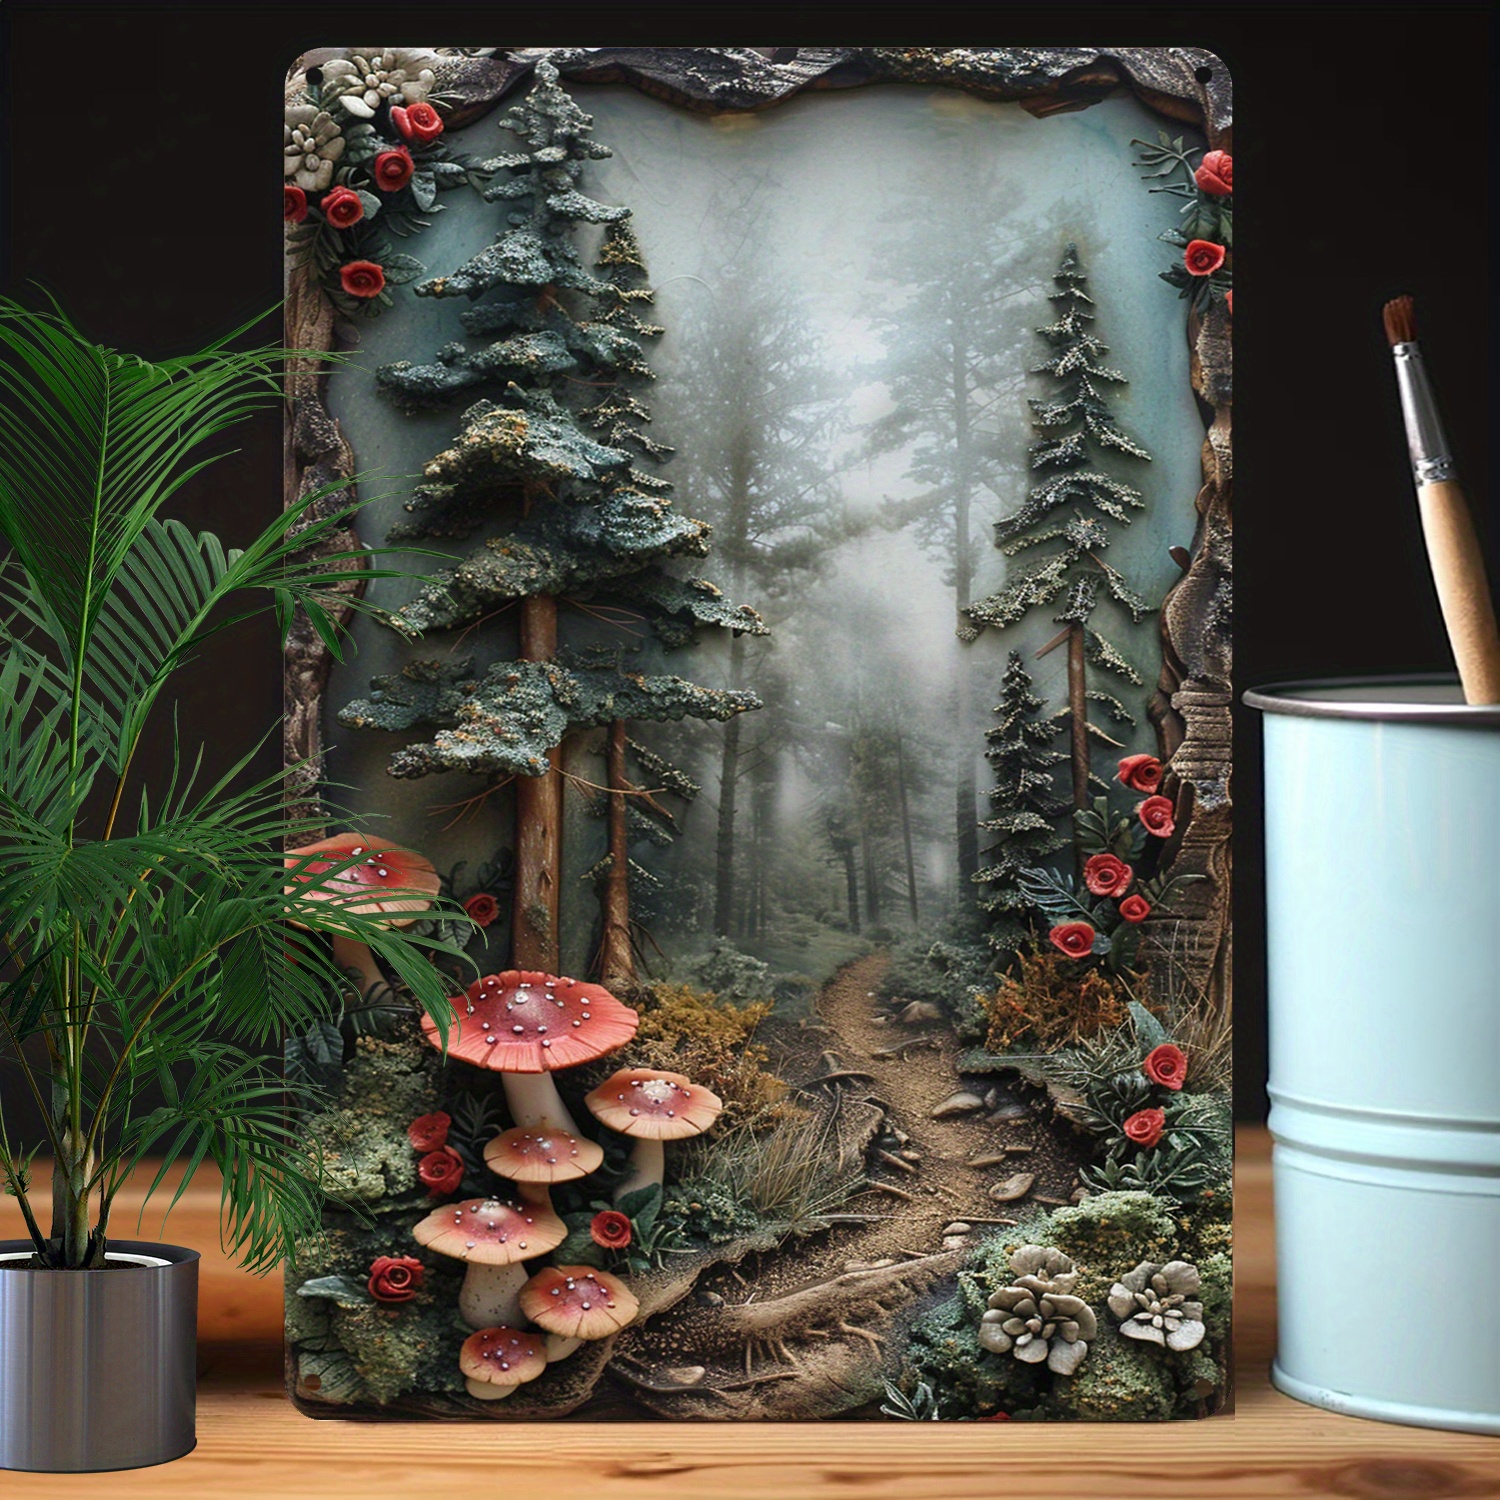 

Misty Forest Aluminum Art Piece, Durable Metal Wall Decor With 3d Effect, Moisture Resistant, High Bend Resistance, 8x12 Inch - Home & Office Decorative Tin Sign, Unique Gift For Nature Lovers A590